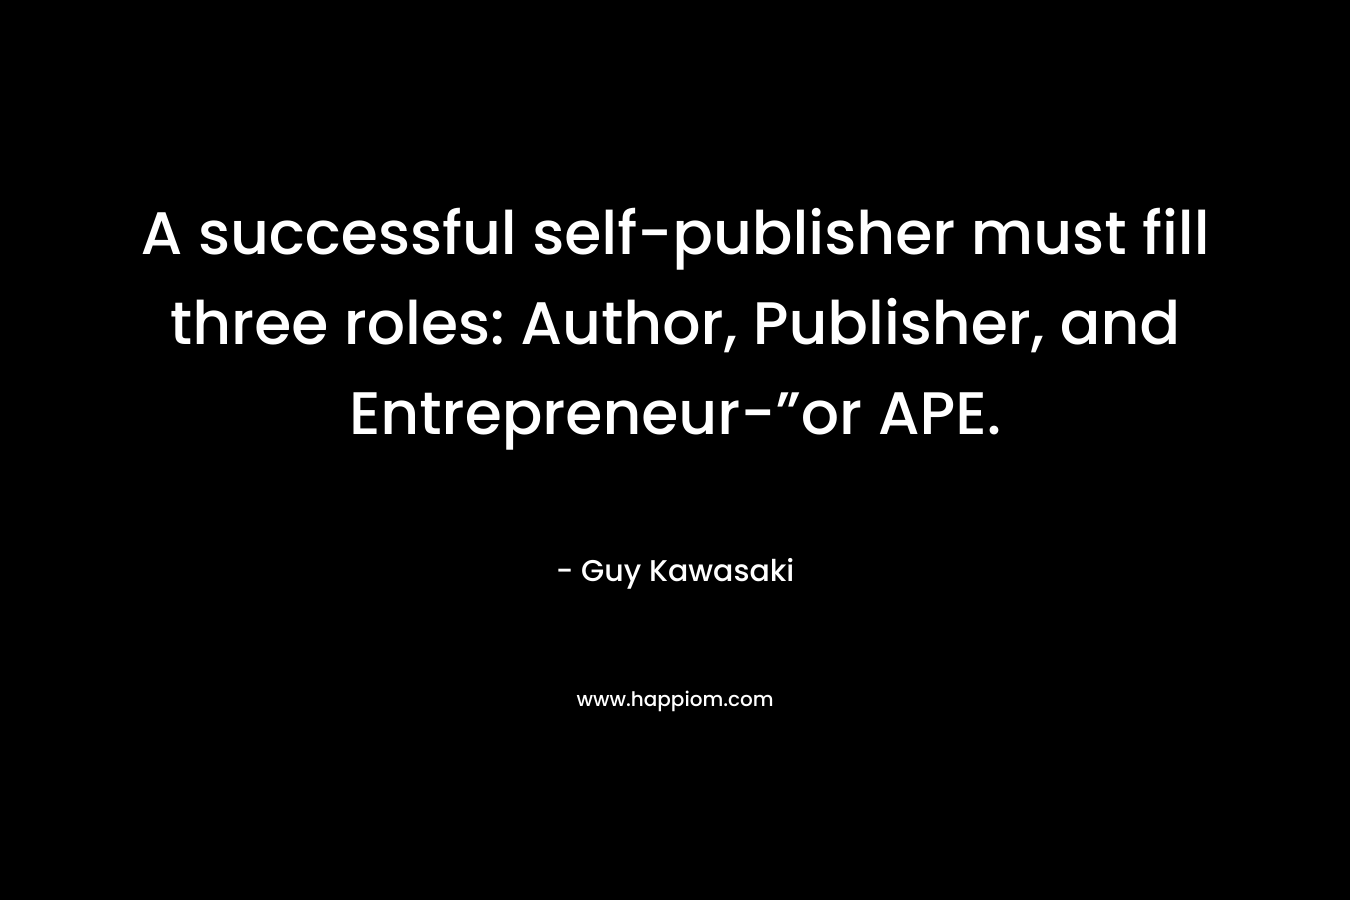 A successful self-publisher must fill three roles: Author, Publisher, and Entrepreneur-”or APE. – Guy Kawasaki